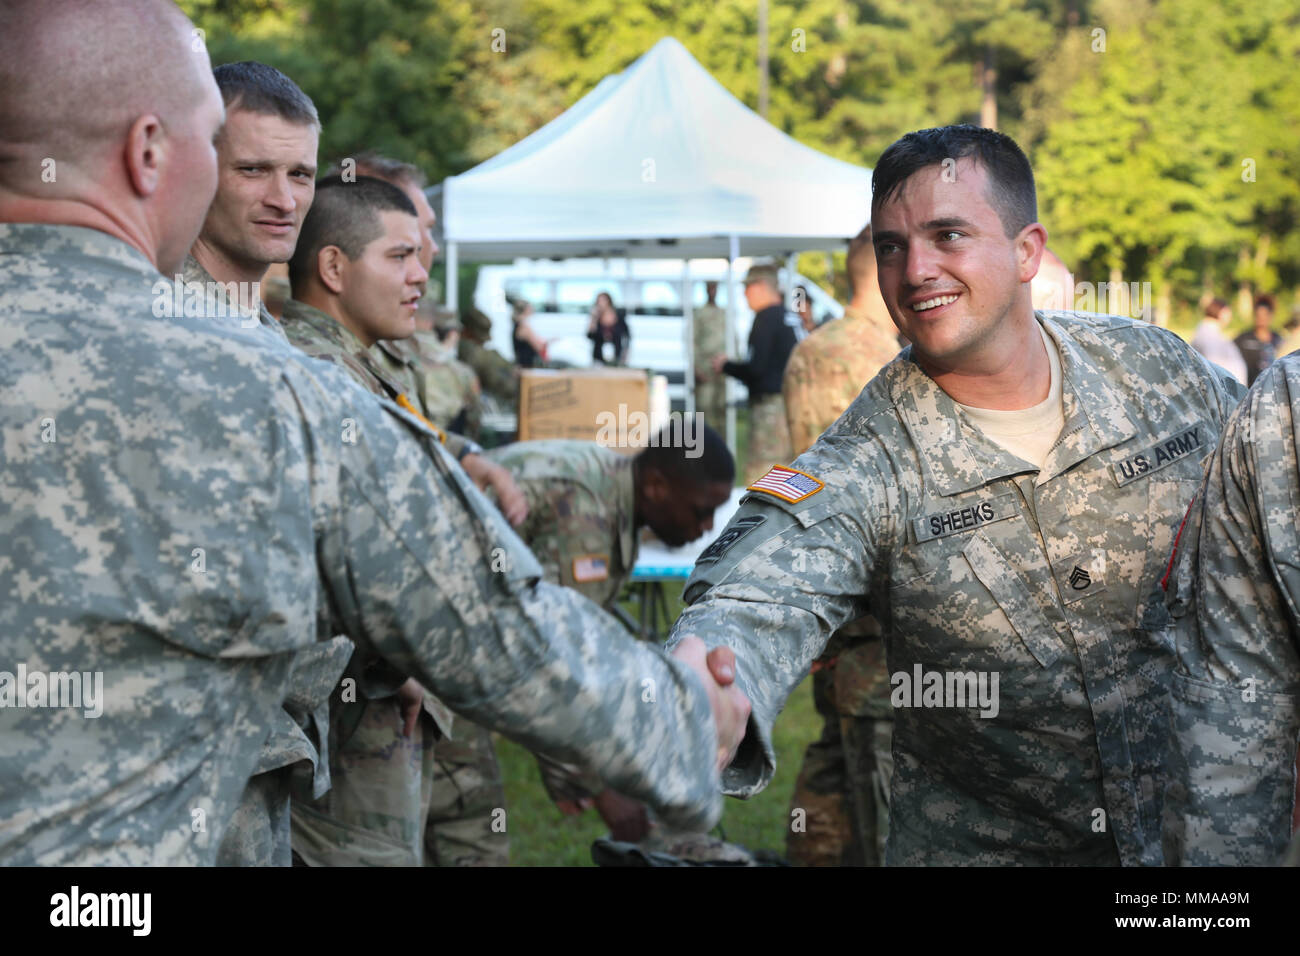 U.S. Army Staff Sgt. Tyler Sheeks, assigned to the Keller Army Community Hospital, shakes hands with fellow competitor Capt. Jeremy Lewis after the 2017 Best Medic Competition at Fort Bragg, N.C., Sept. 20, 2017. The competition tested the physical and mental toughness, as well as the technical competence, of each medic to identify the team moving forward to represent the region at the next level of the competition.  (U.S. Army photo by Pfc. Meleesa Gutierrez) Stock Photo